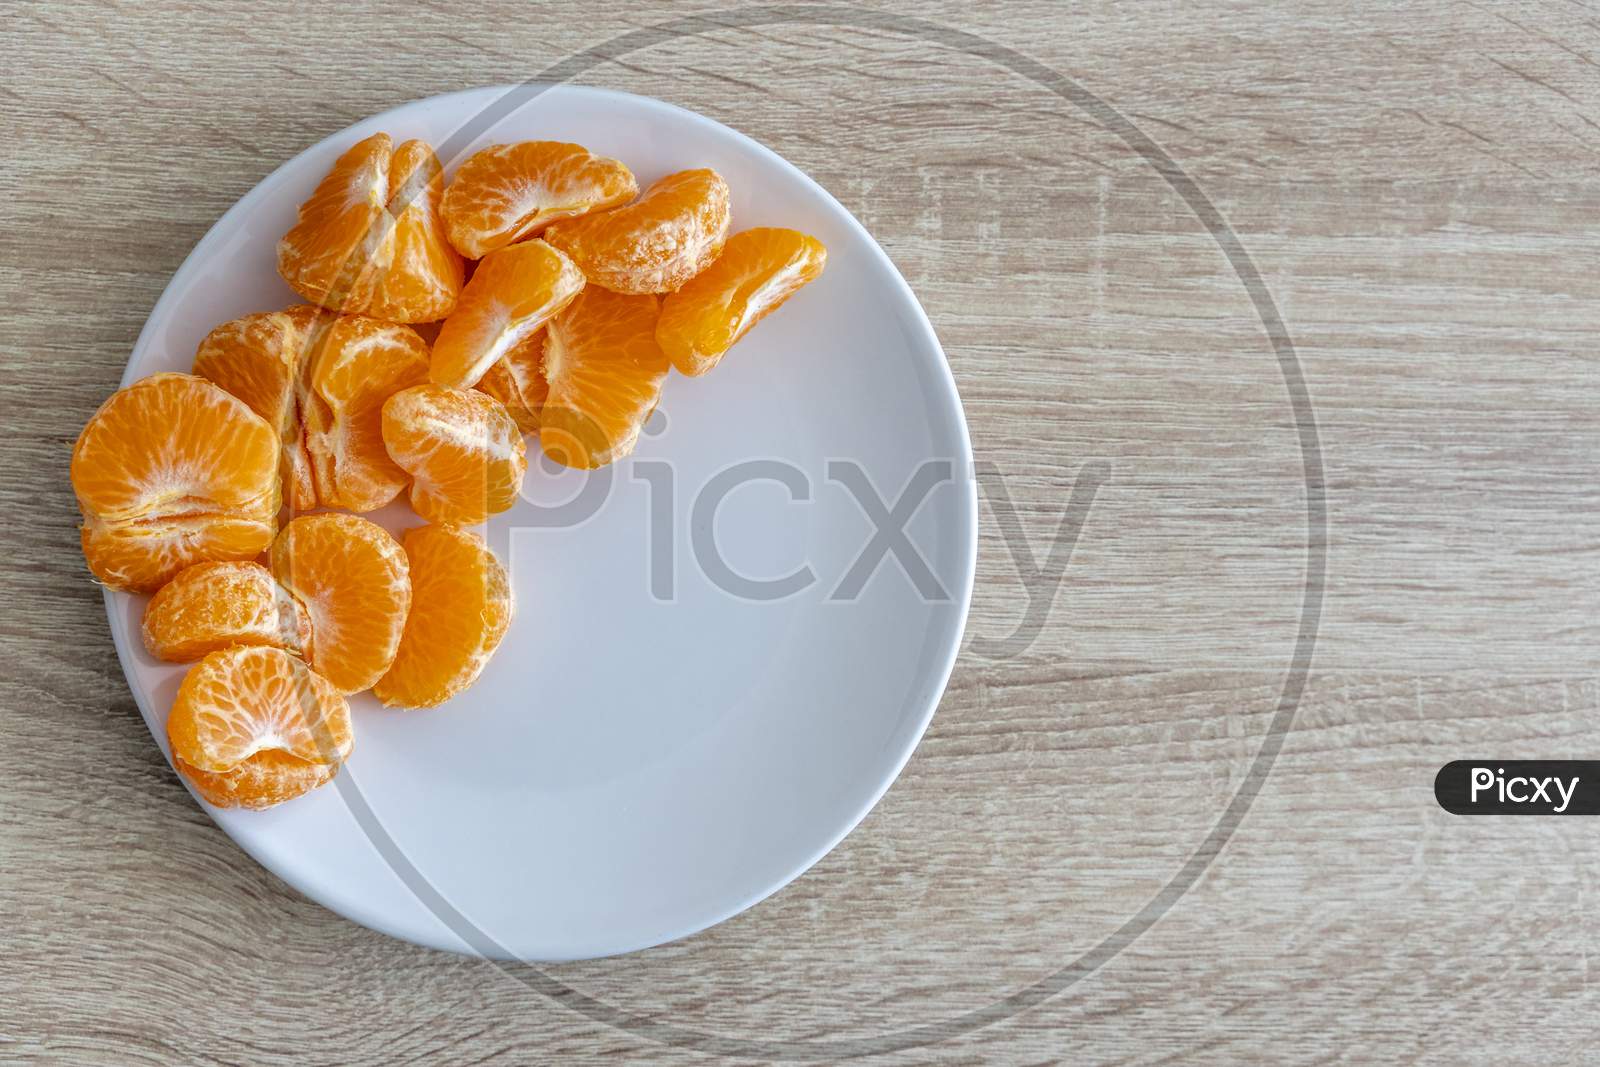 Top Down View Of Pealed Mandarin Peaces On White Plate, Wooden Desk Surface